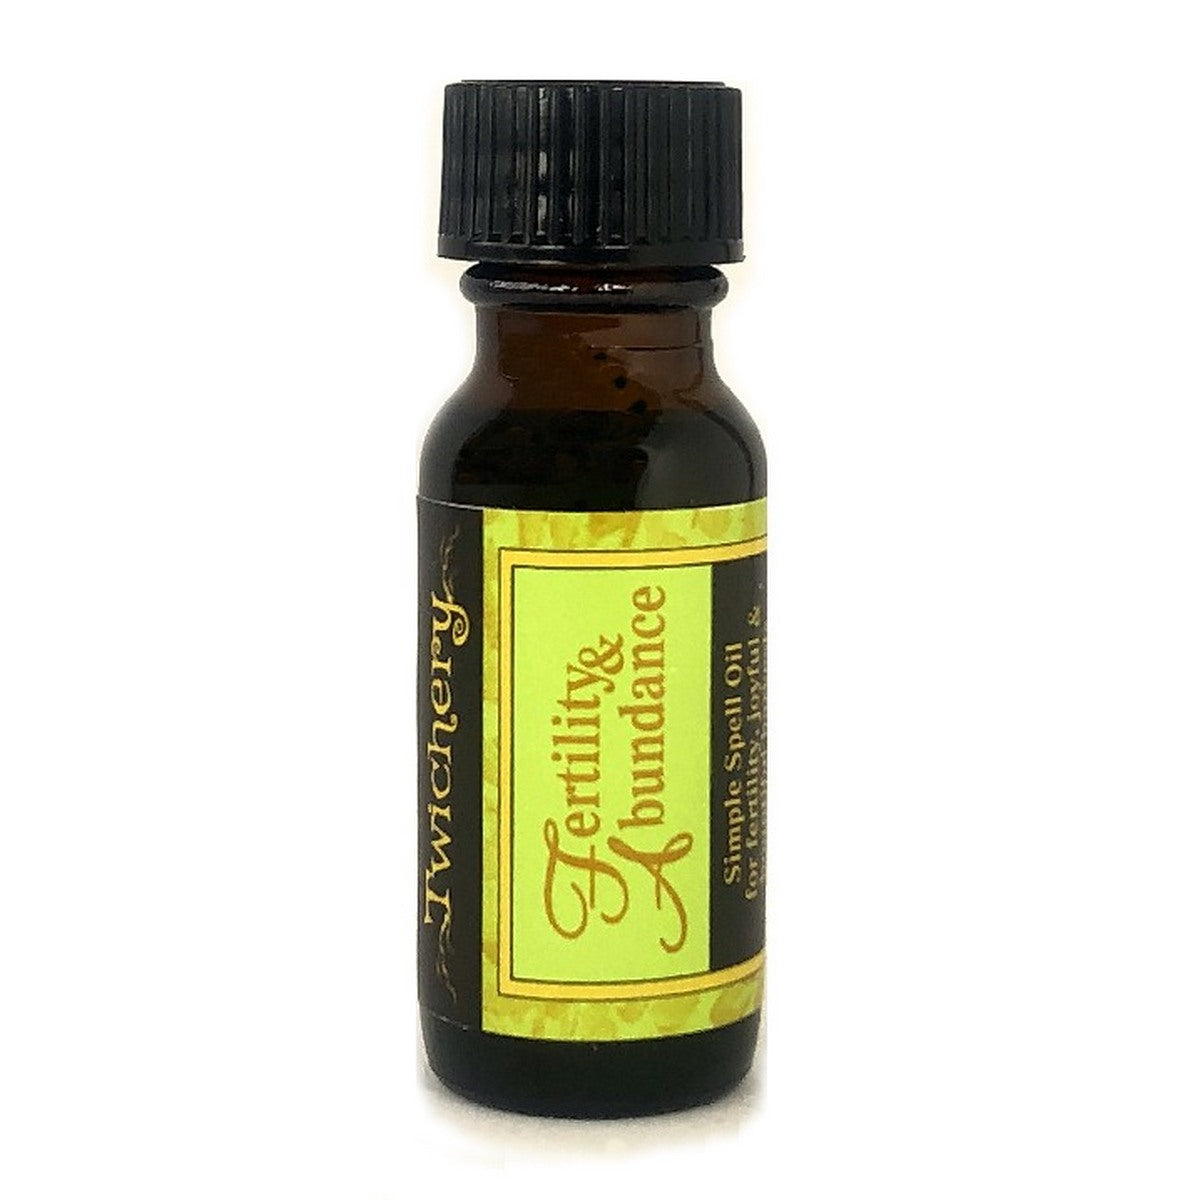 Twichery Fertility & Abundance Quikspell Oil is for blessingways and prayers for a fruitful harvest, hoodoo, voodoo, wicca, pagan, Witchcraft Made Simple